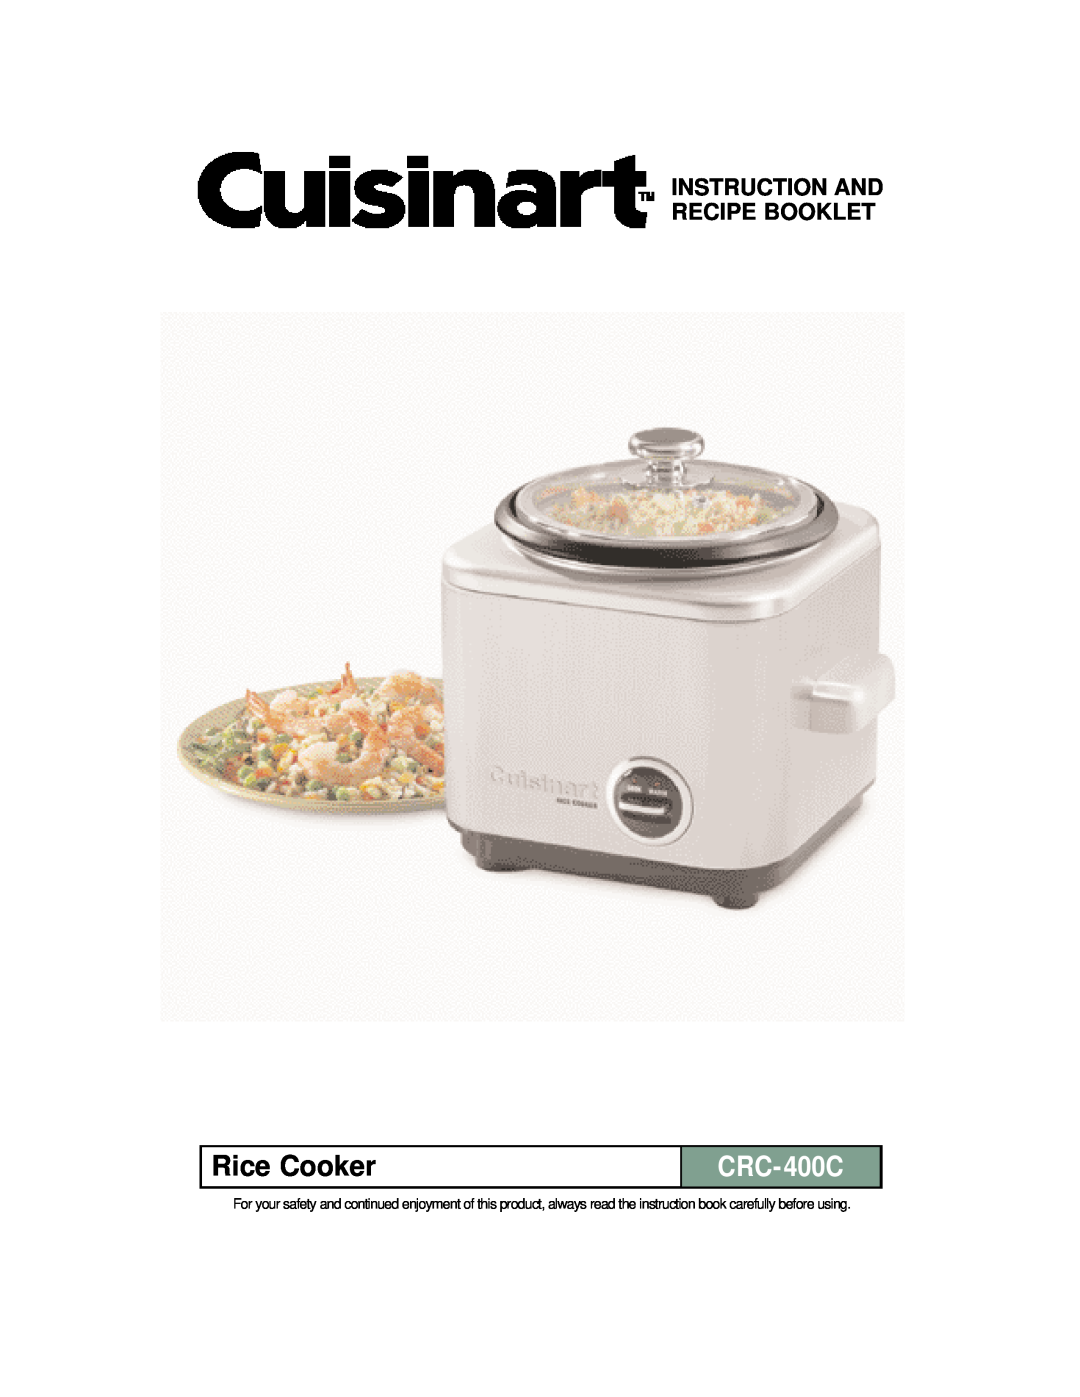 Cuisinart CRC-400C manual Rice Cooker, Instruction And Recipe Booklet 